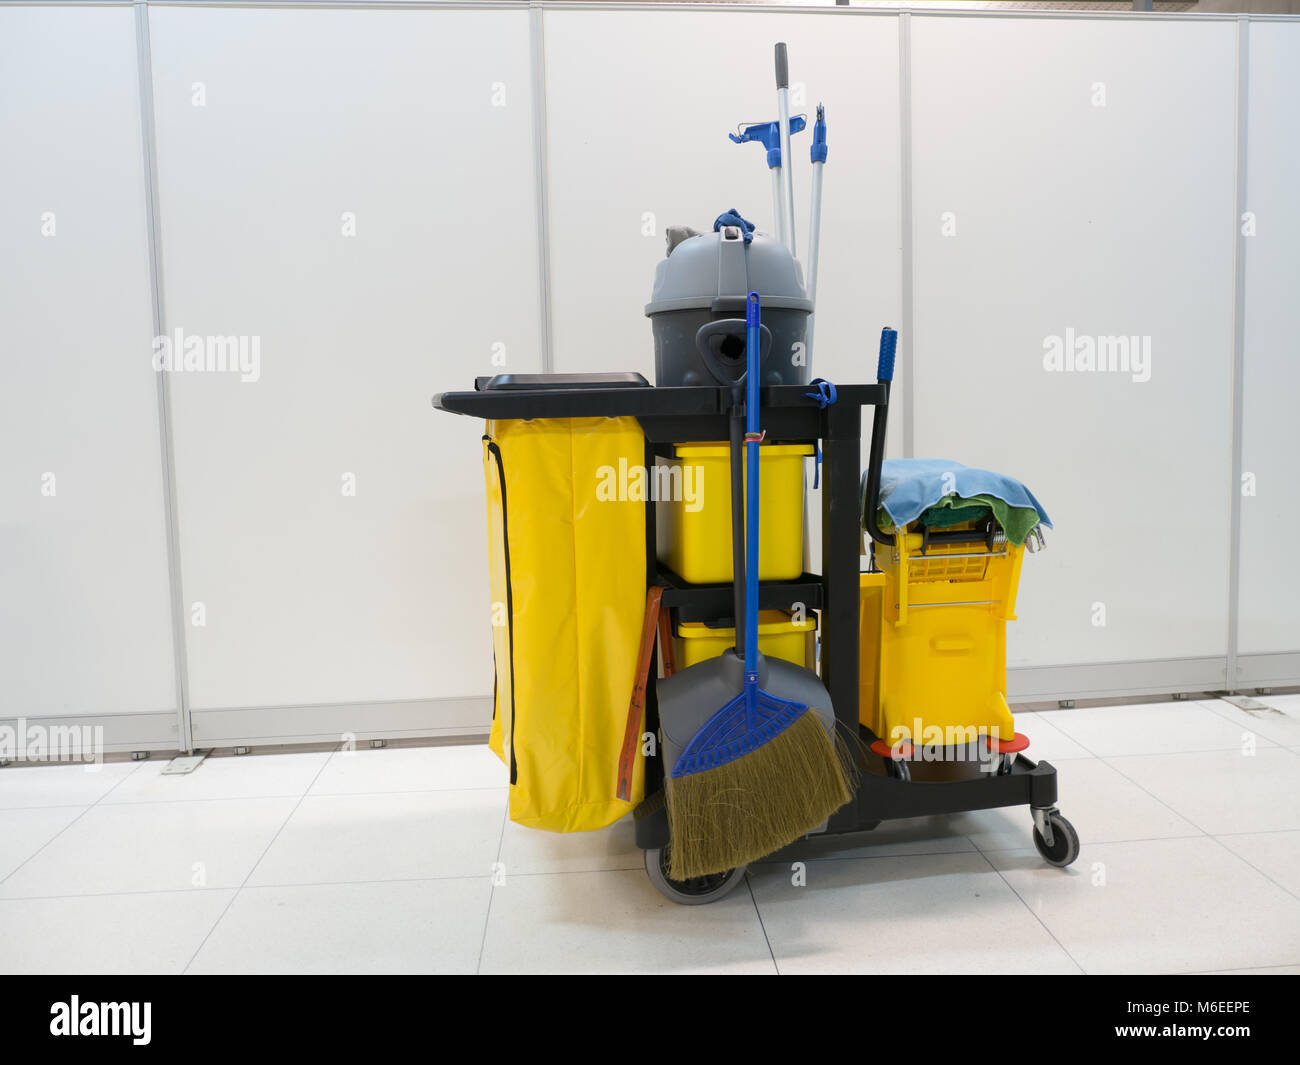 https://c8.alamy.com/comp/M6EEPE/cleaning-tools-cart-wait-for-cleaningbucket-and-set-of-cleaning-equipment-M6EEPE.jpg